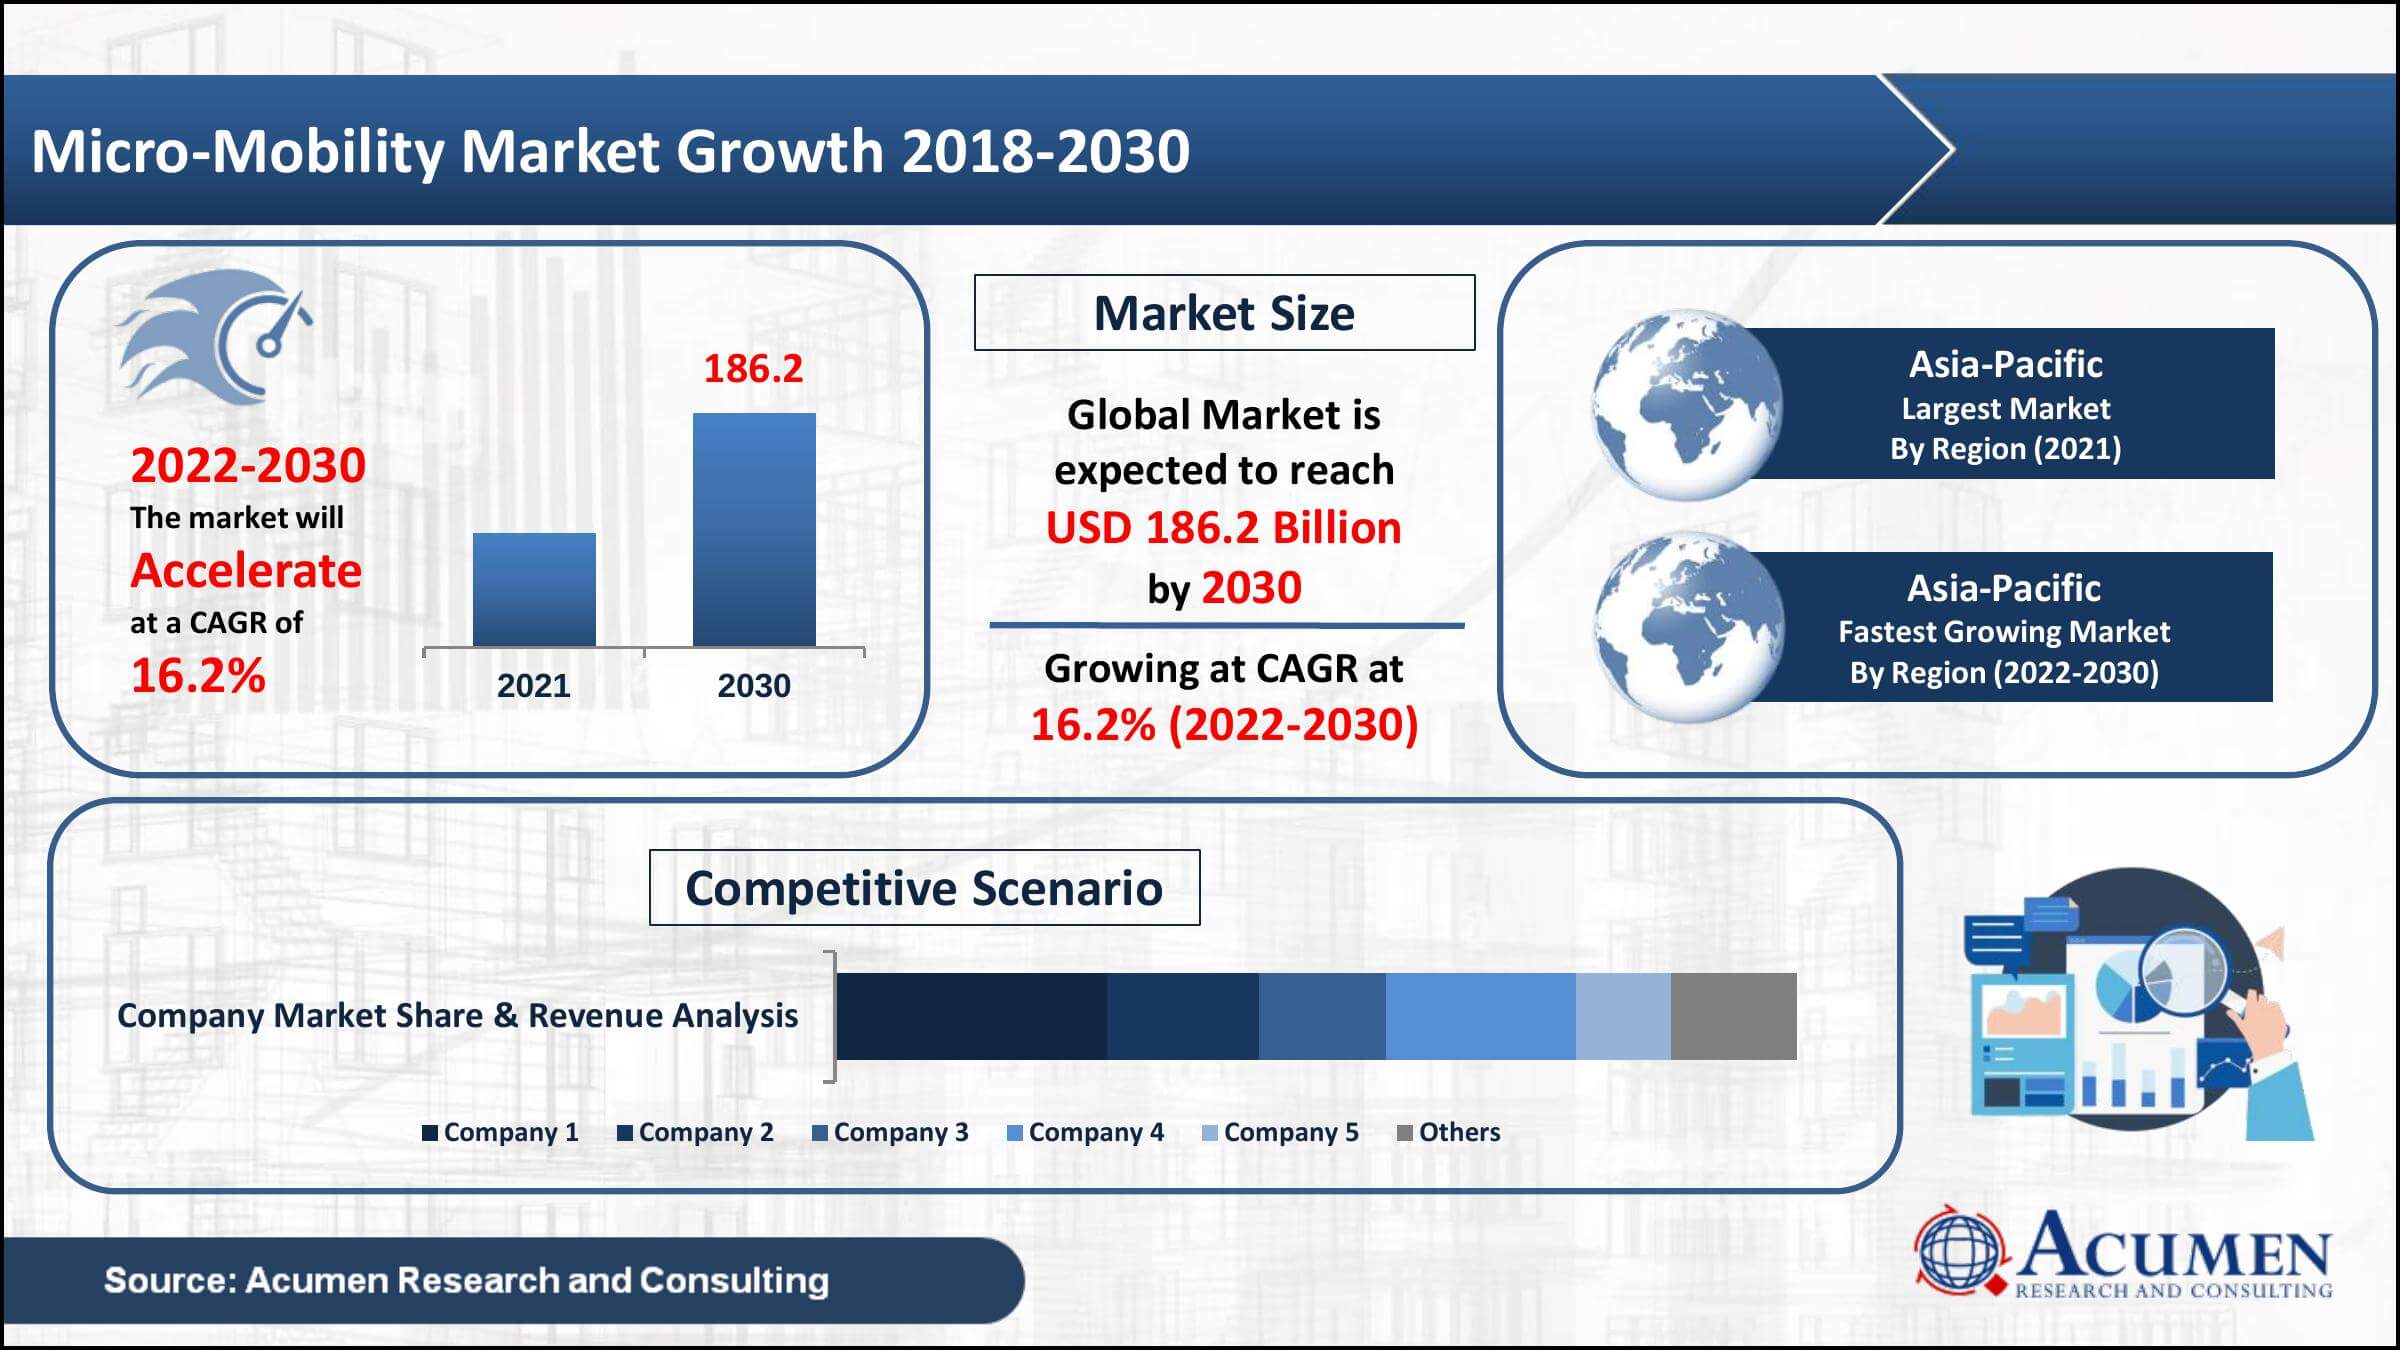 Global micromobility market value collected USD 49.3 Billion in 2021, with a 16.2% CAGR between 2022 and 2030